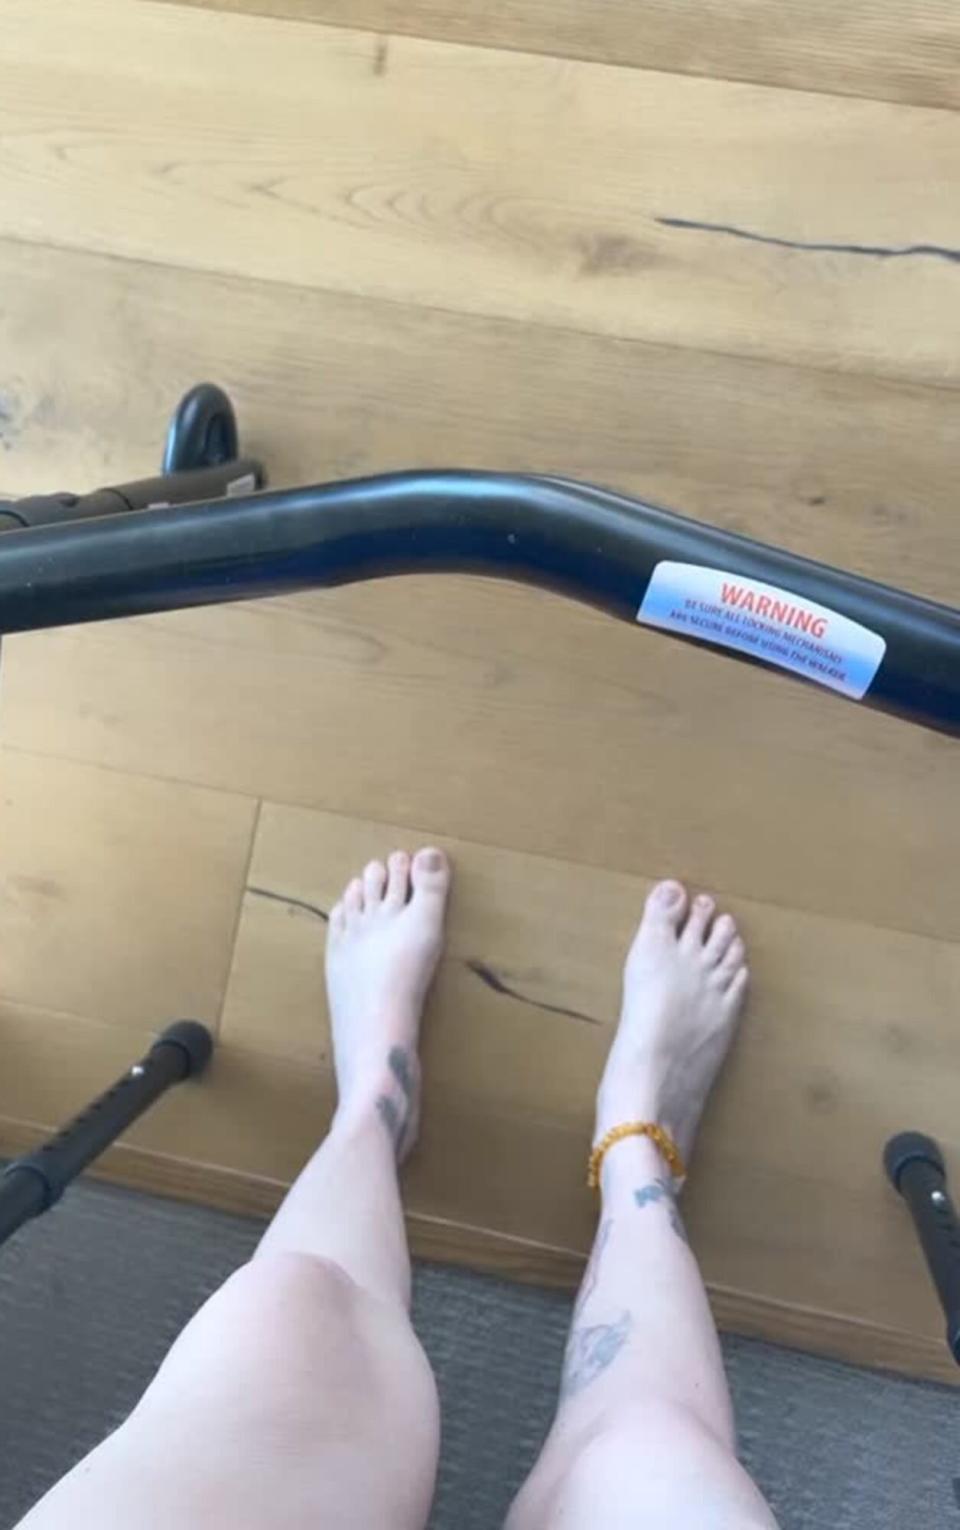 Jenna Jameson Shares Video Using a Walker, Says She's Trying to 'Phase Out' Her Wheelchair: 'Up and About'